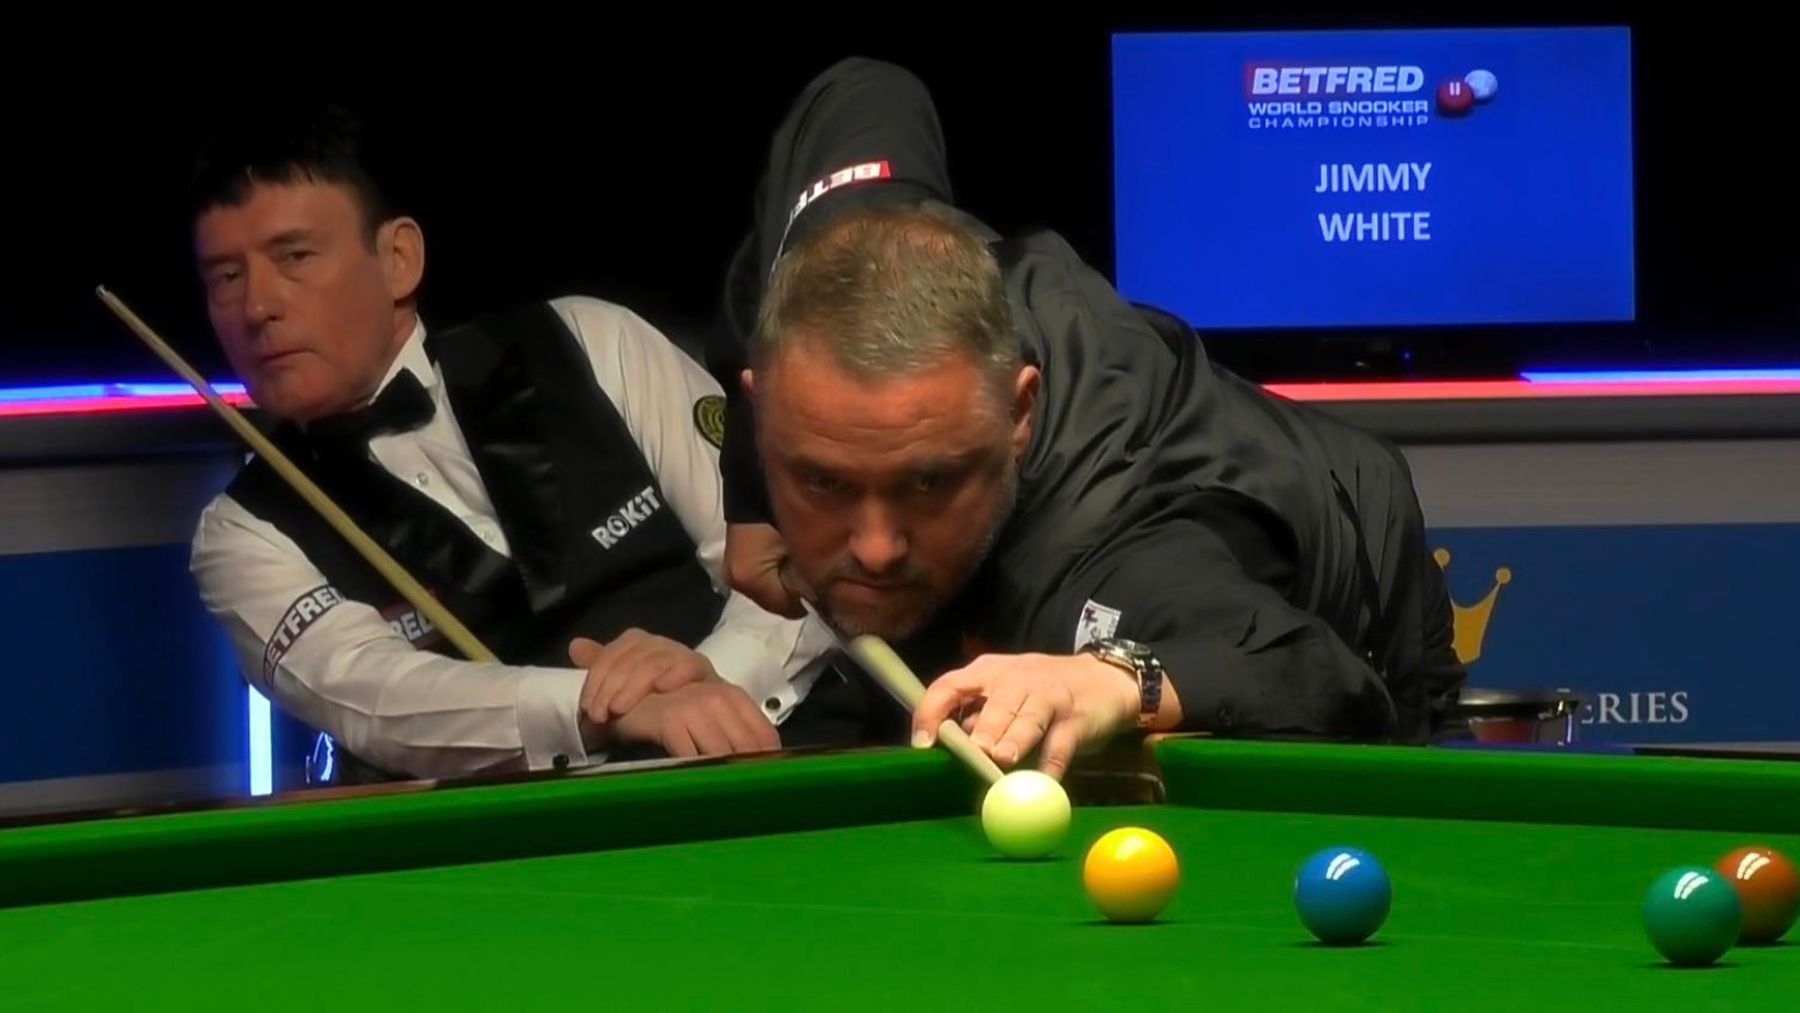 World Snooker Championship qualifying Stephen Hendry beats Jimmy White to move a step closer to the Crucible